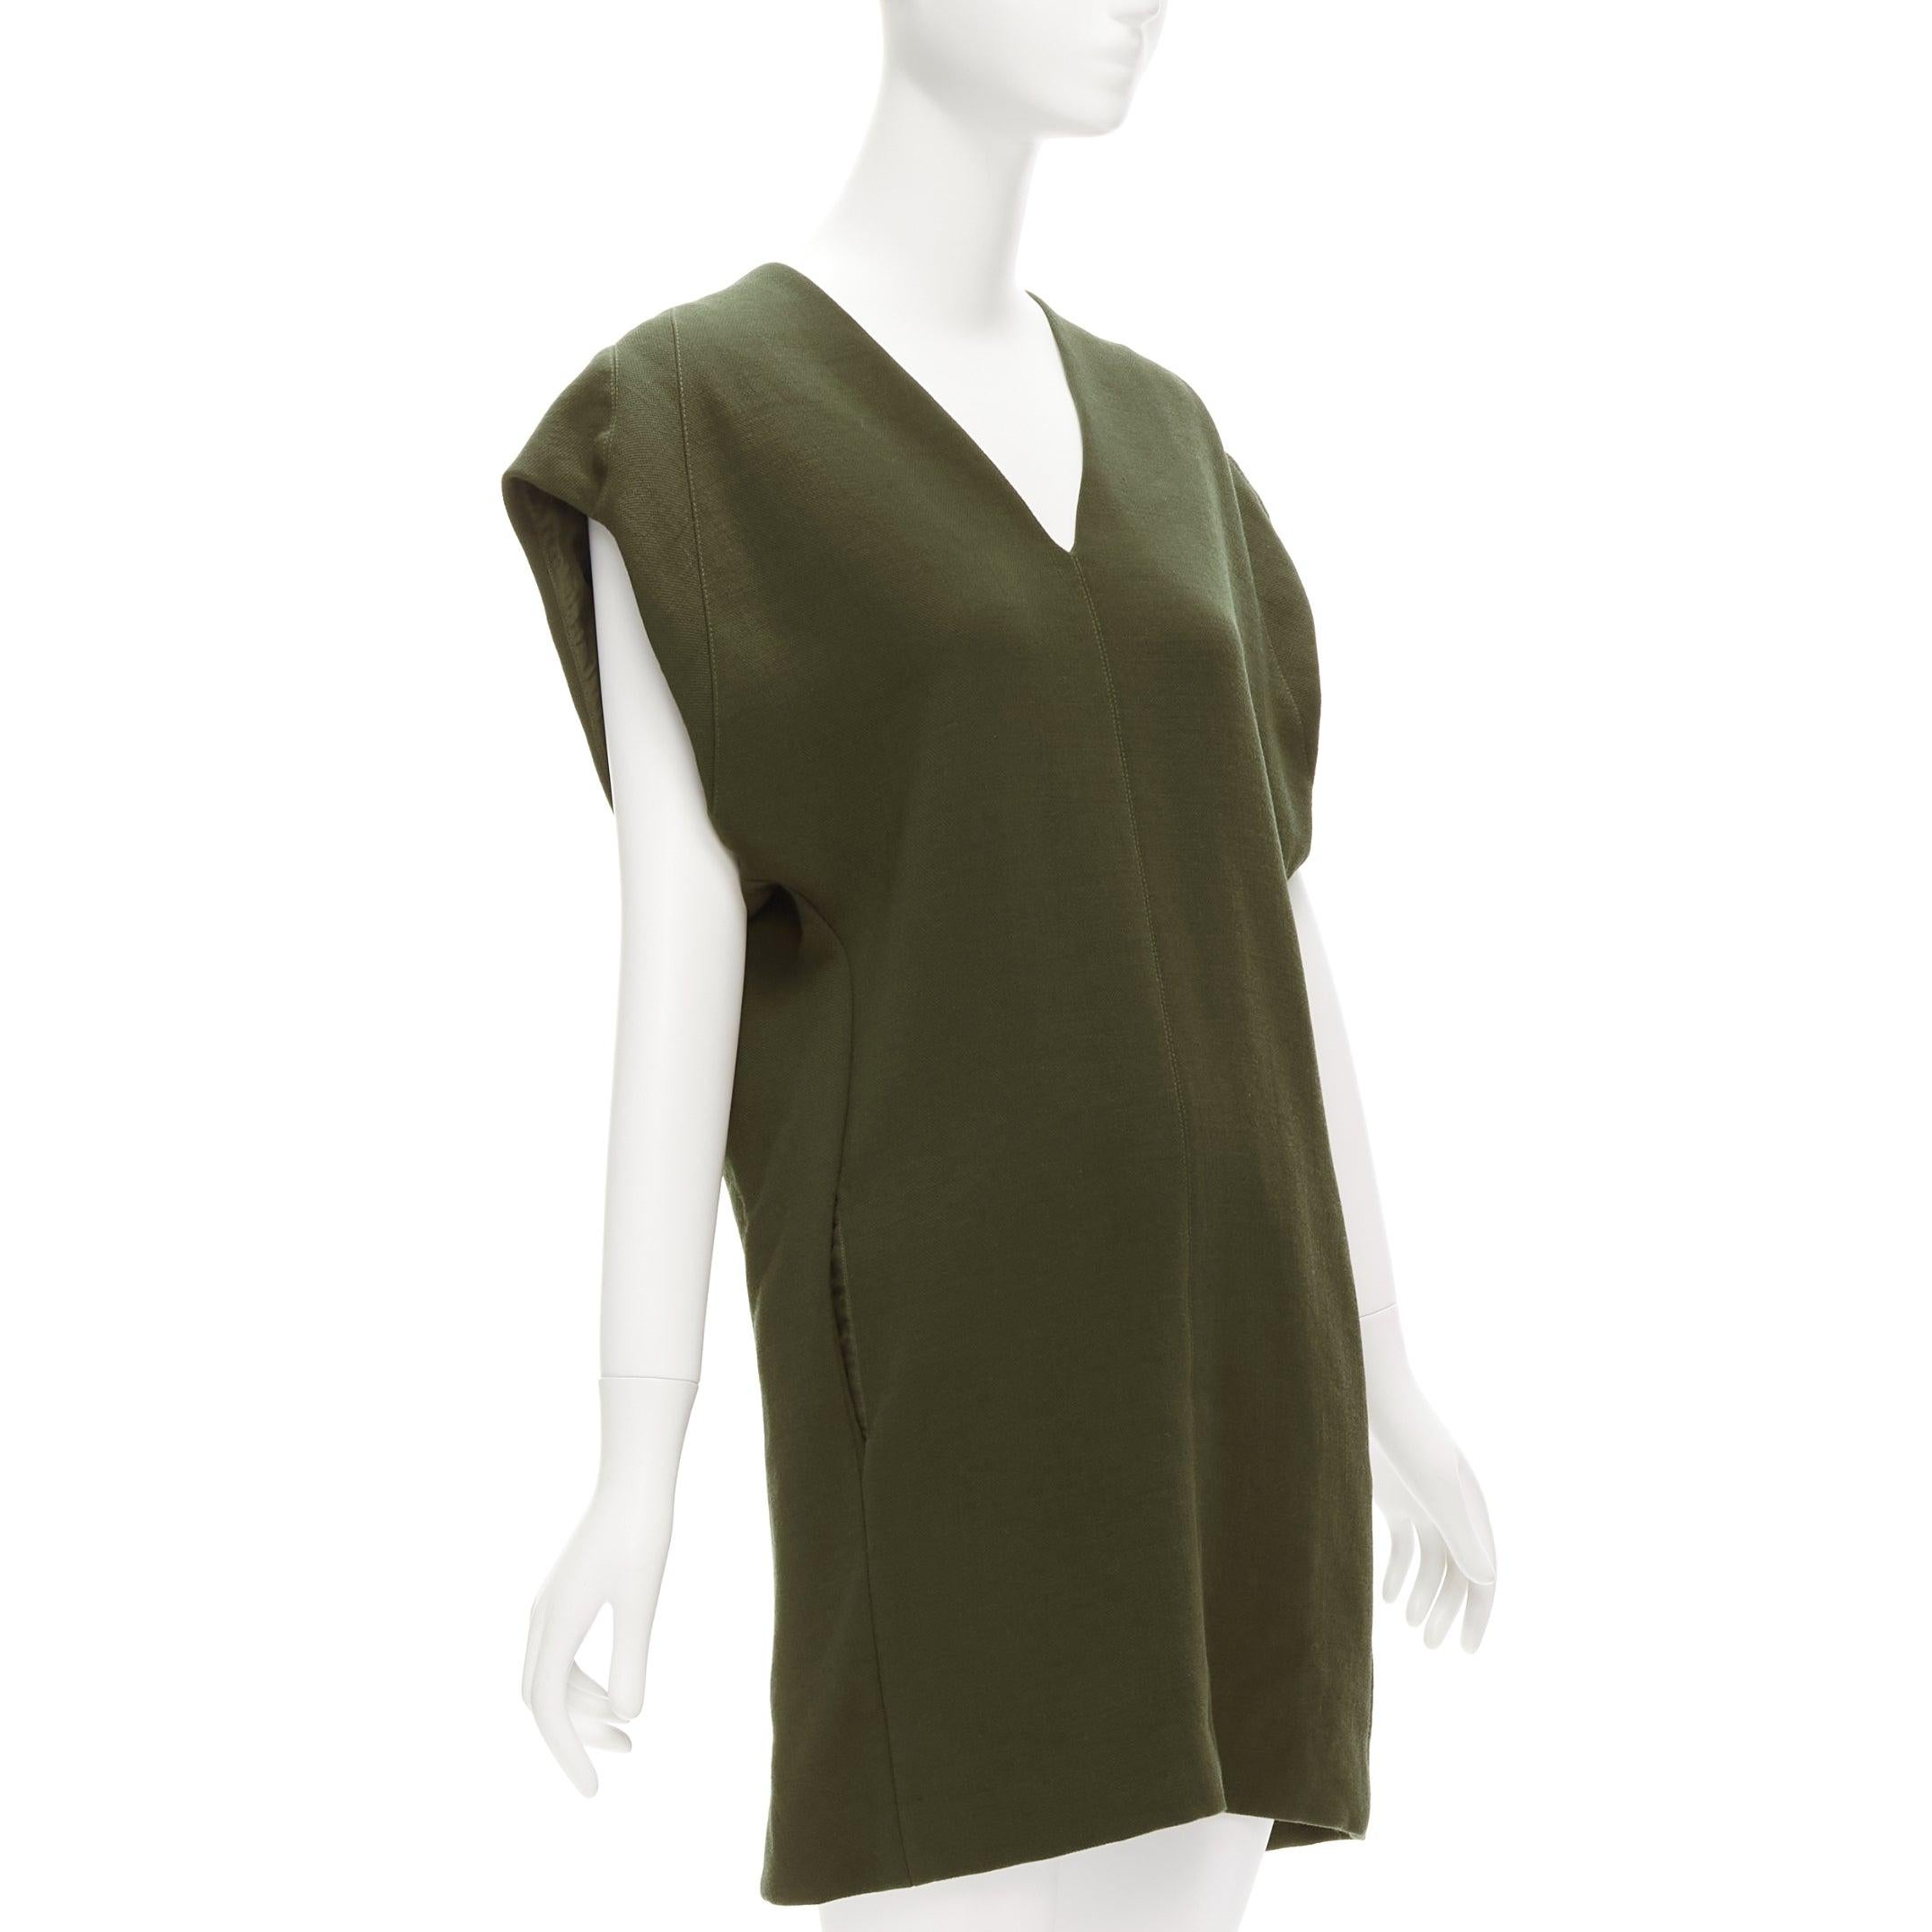 MARNI 100% virgin wool olive silk lined V neck boxy mini dress IT40 S
Reference: CELG/A00279
Brand: Marni
Material: Virgin Wool
Color: Khaki
Pattern: Solid
Closure: Slip On
Lining: Green Silk
Extra Details: Boxy square cut. Fully lined.
Made in: